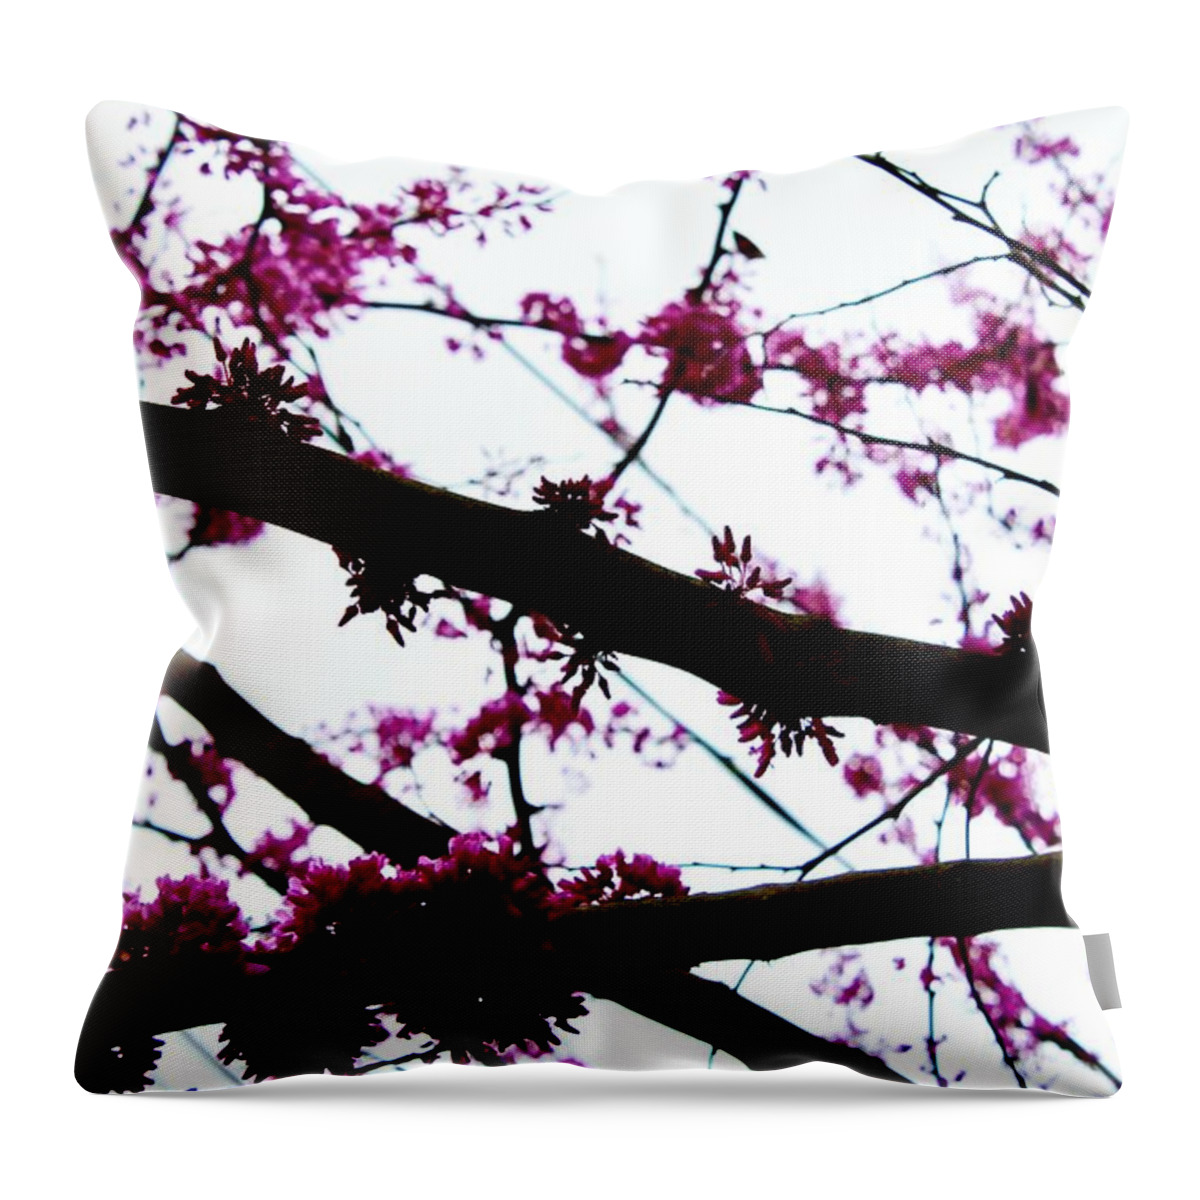 Photography Throw Pillow featuring the photograph Redbud Blooming Branches by M E